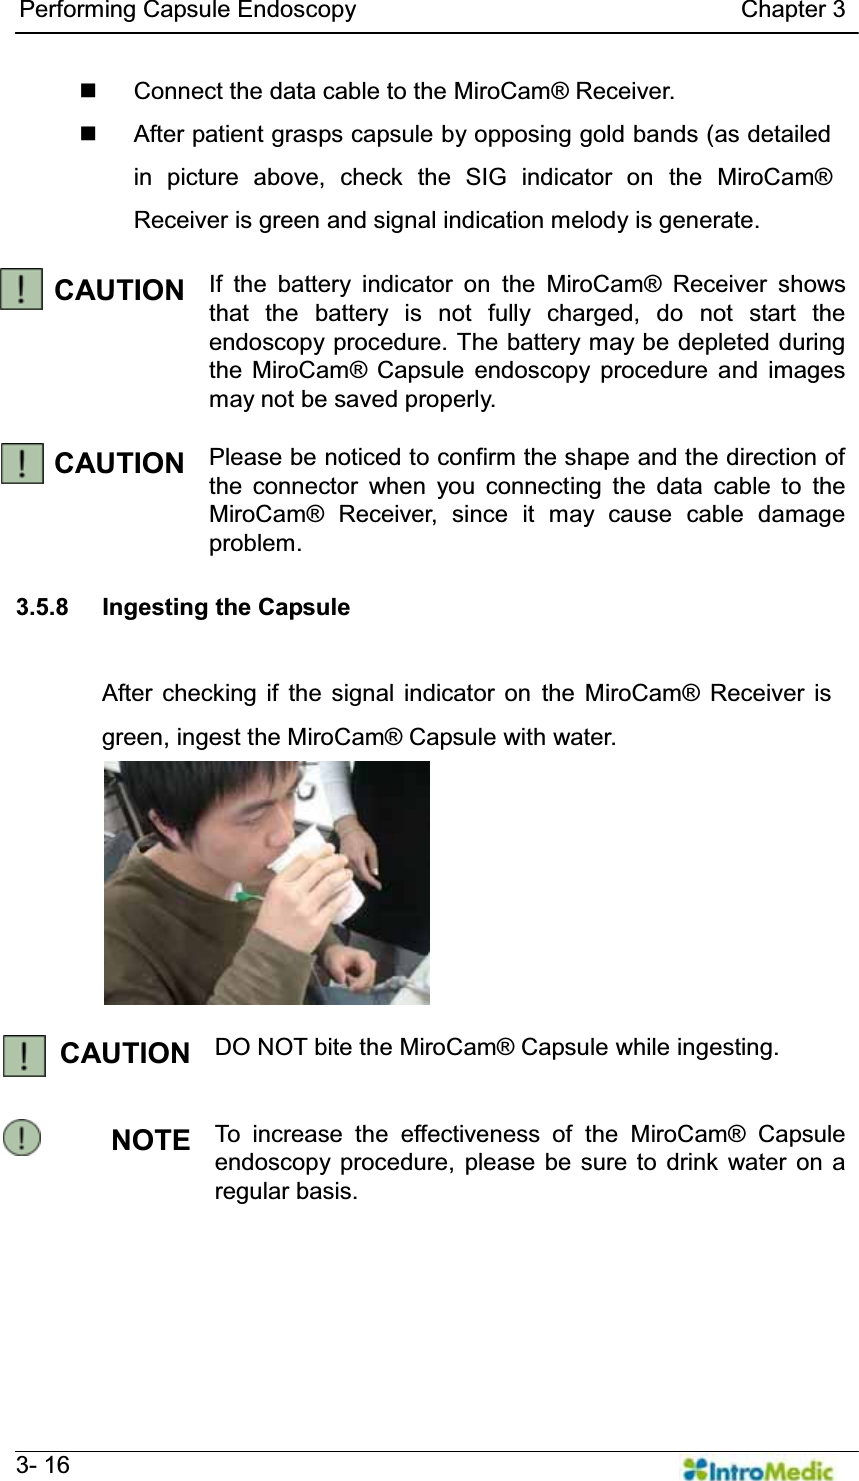   Performing Capsule Endoscopy                                Chapter 3   3- 16   Connect the data cable to the MiroCam® Receiver.   After patient grasps capsule by opposing gold bands (as detailed in picture above, check the SIG indicator on the MiroCam® Receiver is green and signal indication melody is generate.  CAUTION If the battery indicator on the MiroCam® Receiver shows that the battery is not fully charged, do not start the endoscopy procedure. The battery may be depleted during the MiroCam® Capsule endoscopy procedure and images may not be saved properly.  CAUTION  Please be noticed to confirm the shape and the direction of the connector when you connecting the data cable to the MiroCam® Receiver, since it may cause cable damage problem.  3.5.8 Ingesting the Capsule  After checking if the signal indicator on the MiroCam® Receiver is green, ingest the MiroCam® Capsule with water.  CAUTION DO NOT bite the MiroCam® Capsule while ingesting.   NOTE To increase the effectiveness of the MiroCam® Capsule endoscopy procedure, please be sure to drink water on a regular basis.  